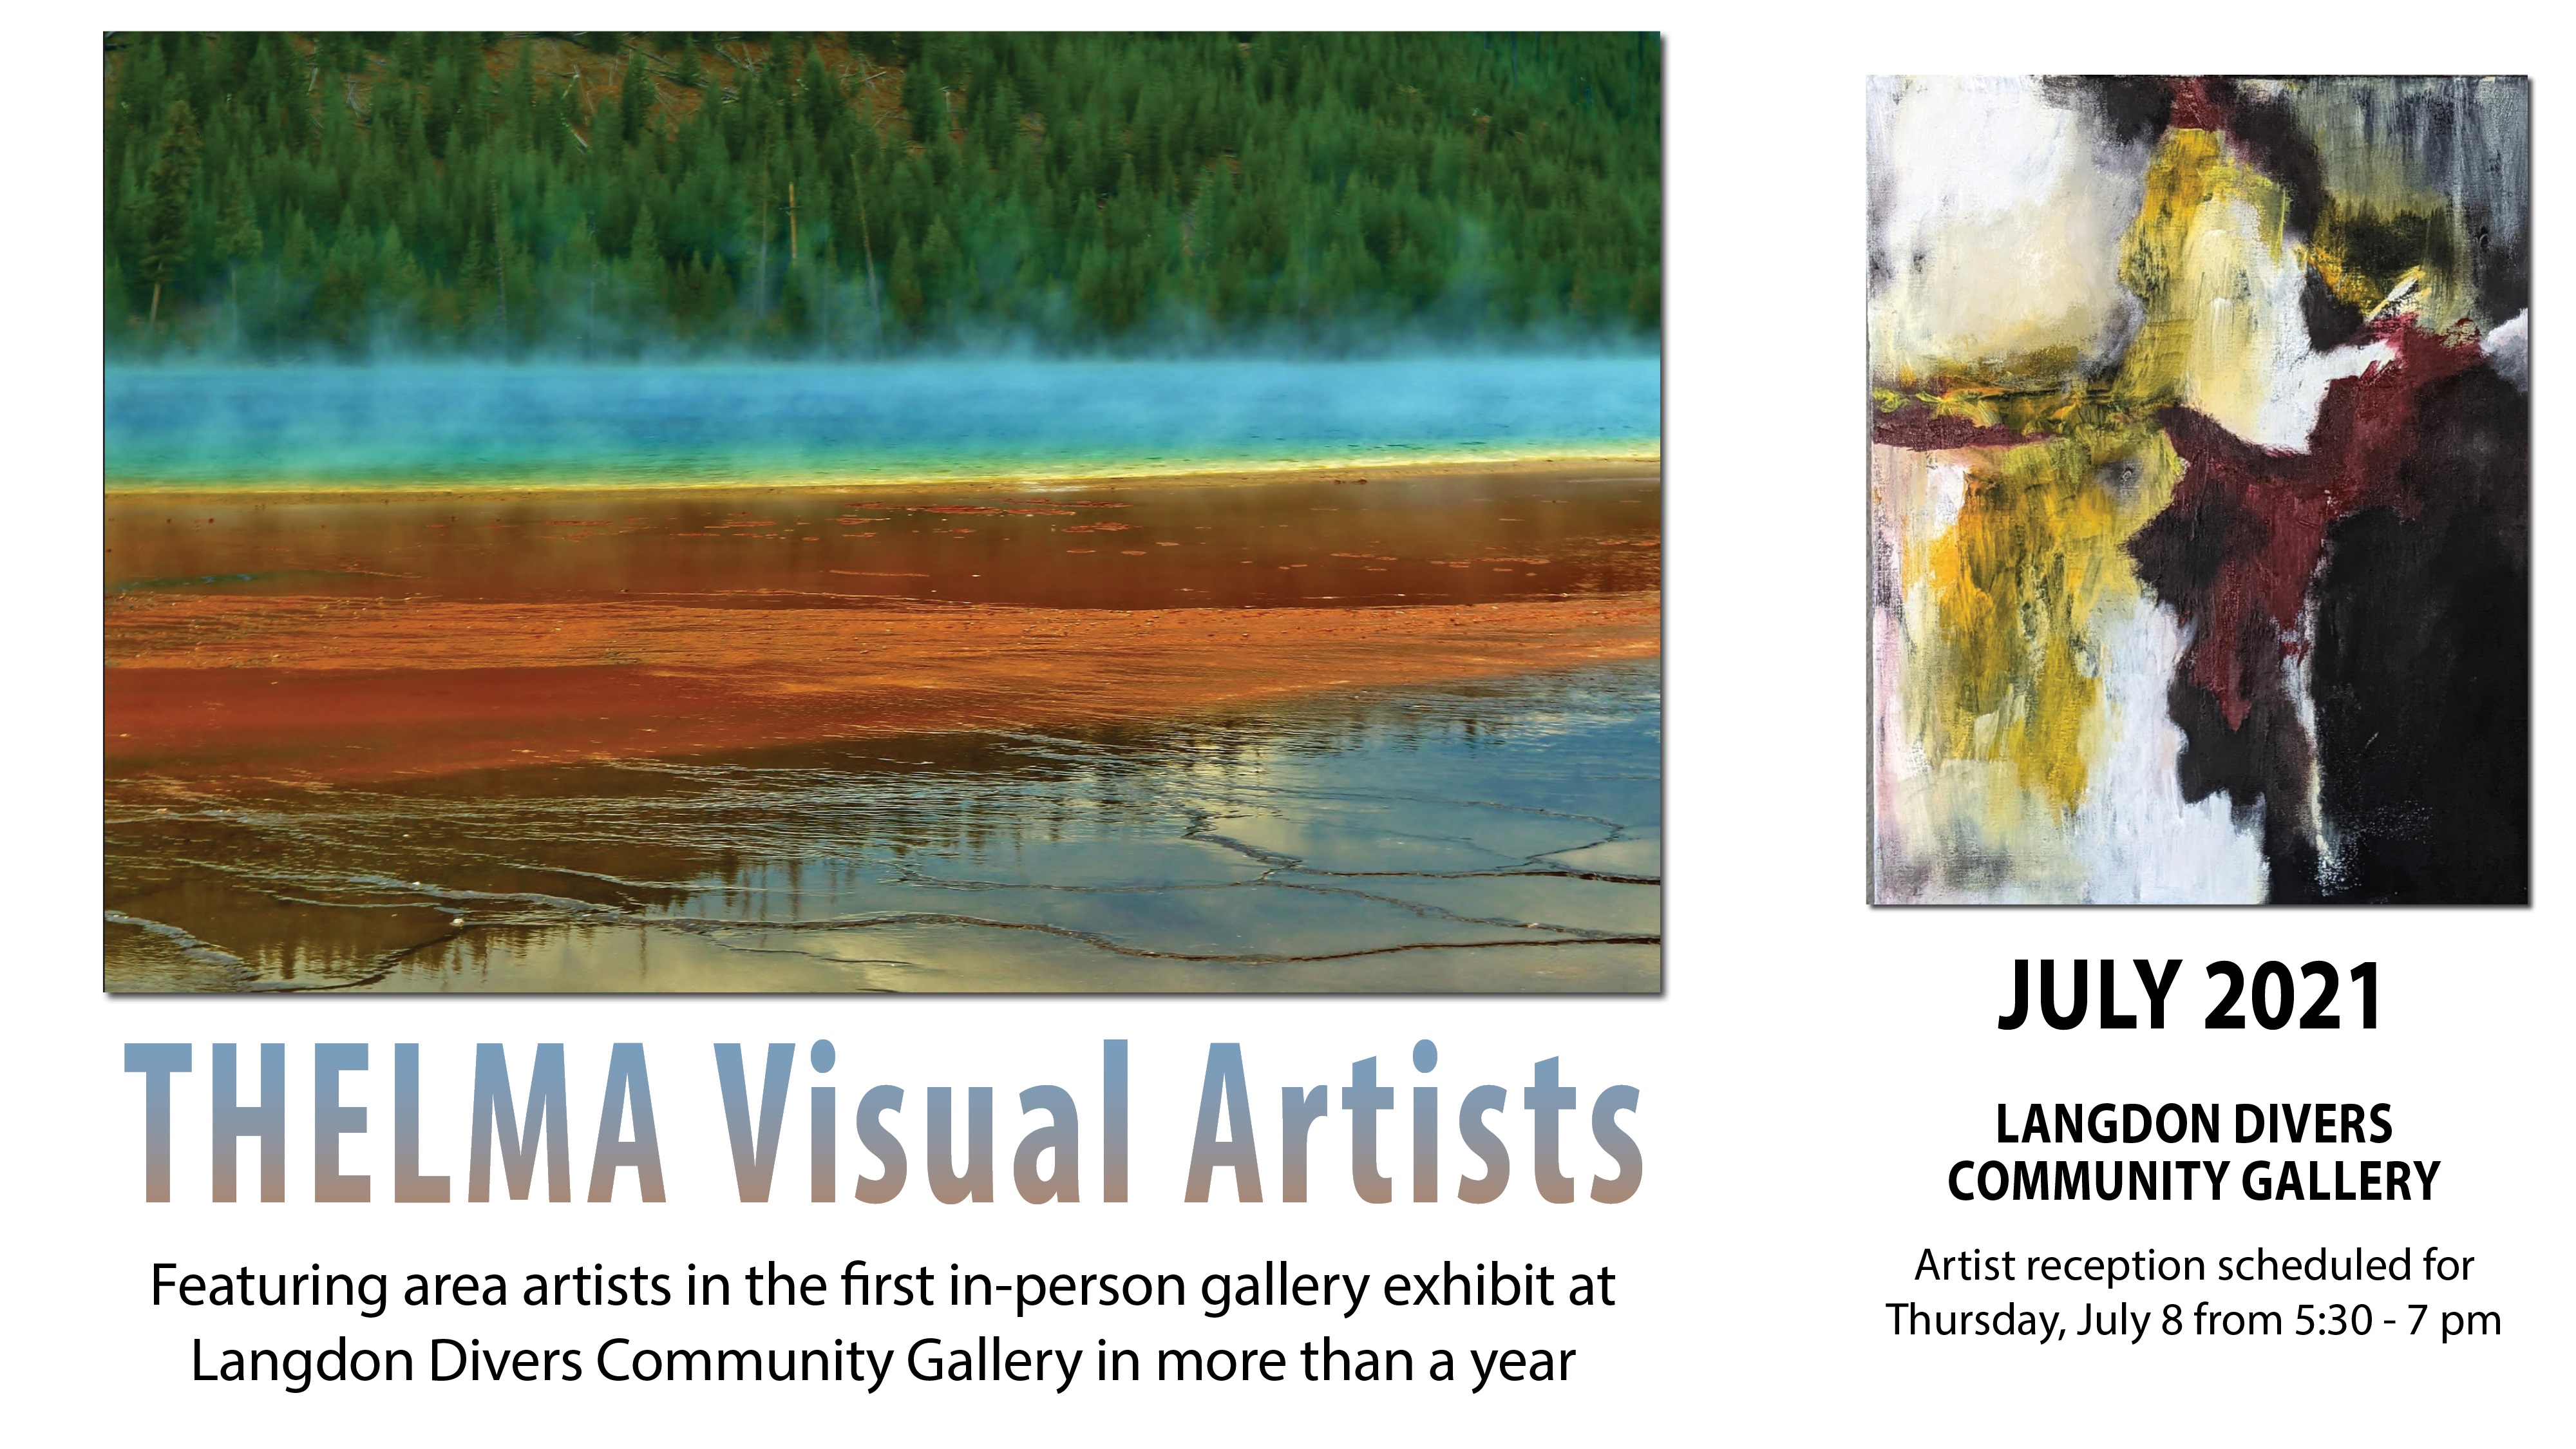 In person exhibit, artist reception returning to Langdon Divers Community Gallery